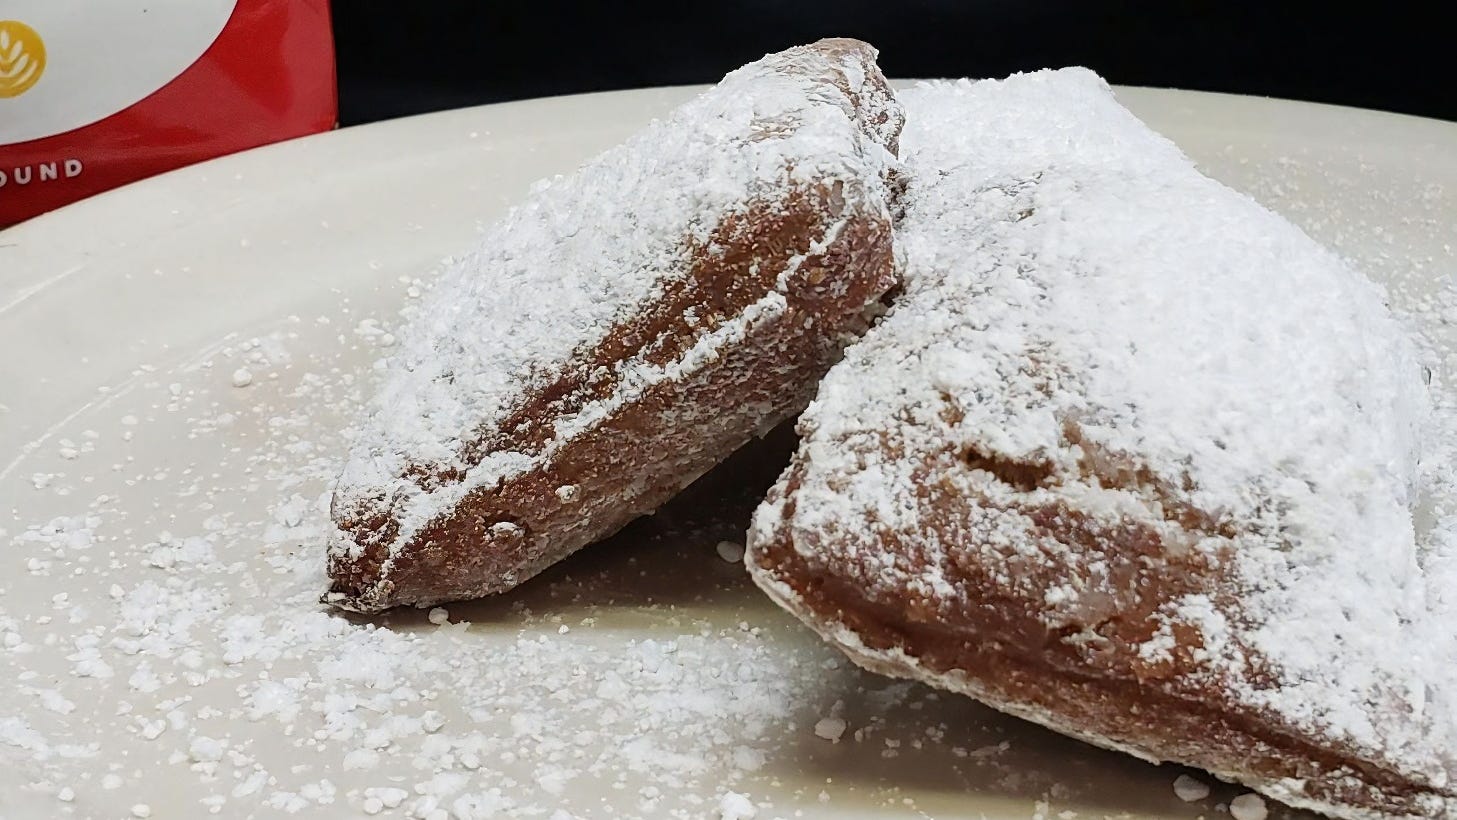   
																It's Fat Tuesday. Here's where to get your donuts to celebrate Mardi Gras 
															 